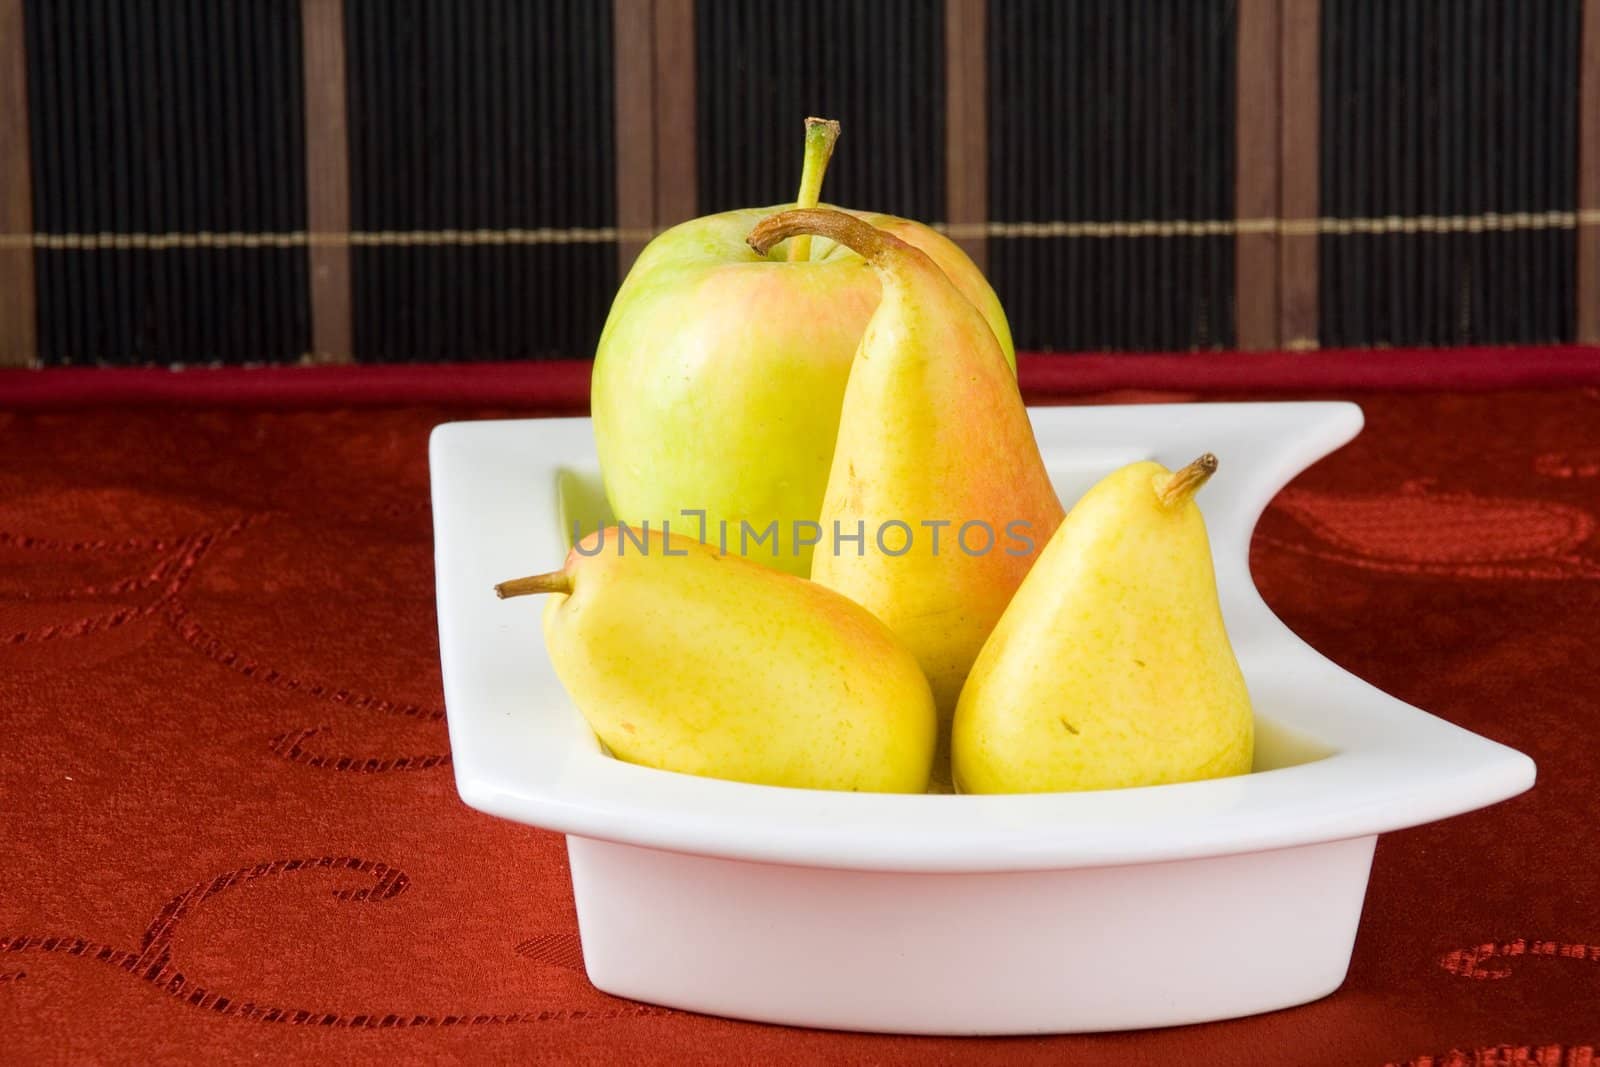 Sweet pears on a table covered with crimson cloth